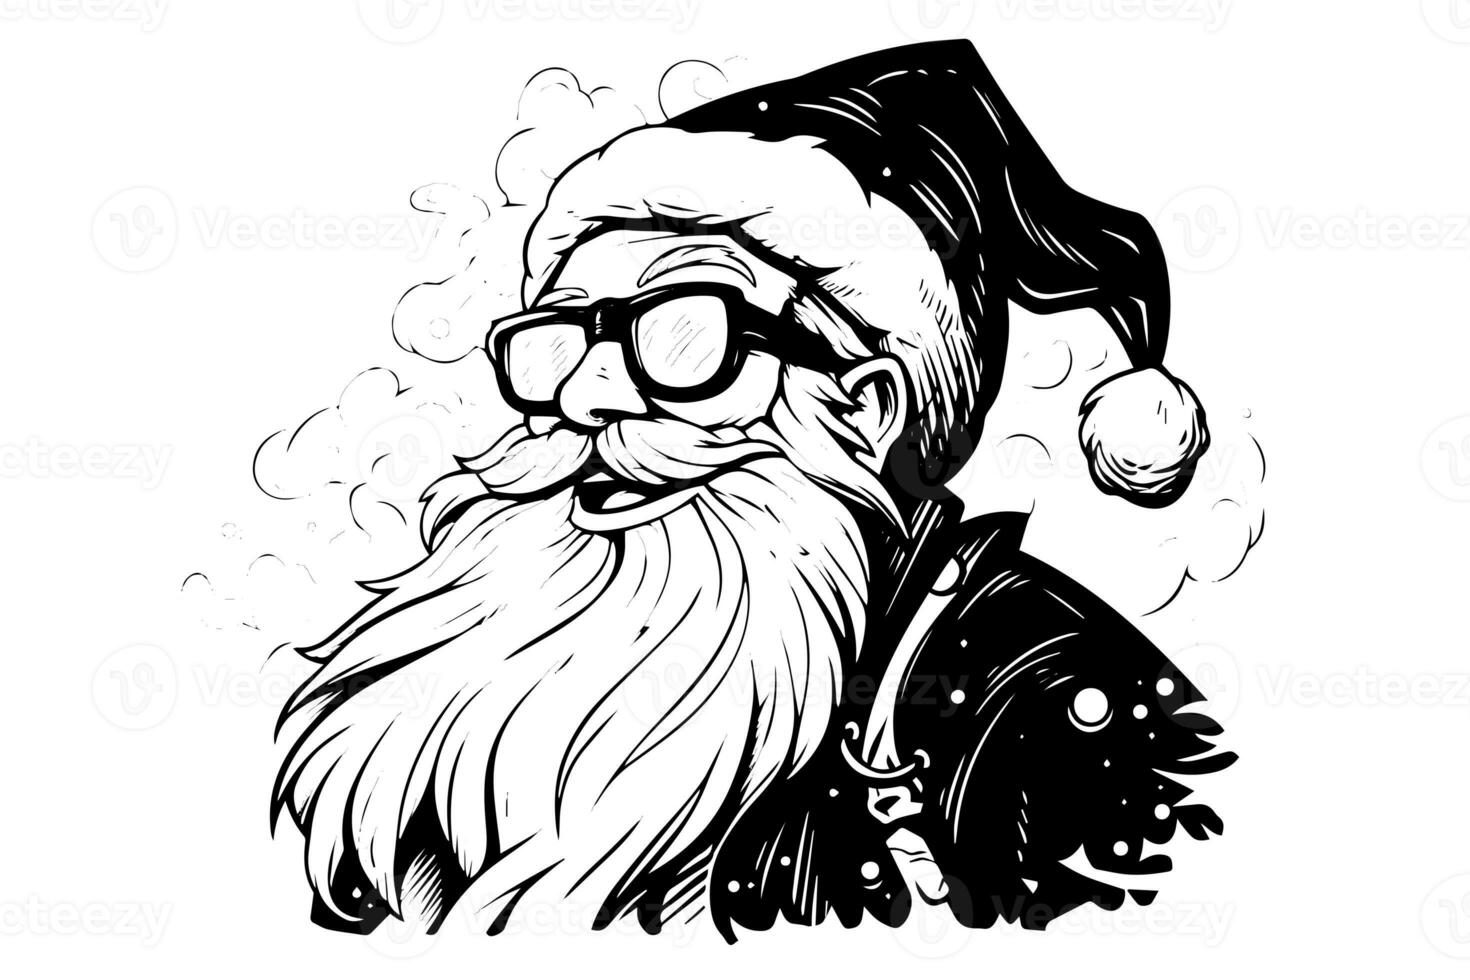 Santa Claus head in a hat sketch hand drawn in engraving style vector illustration. photo